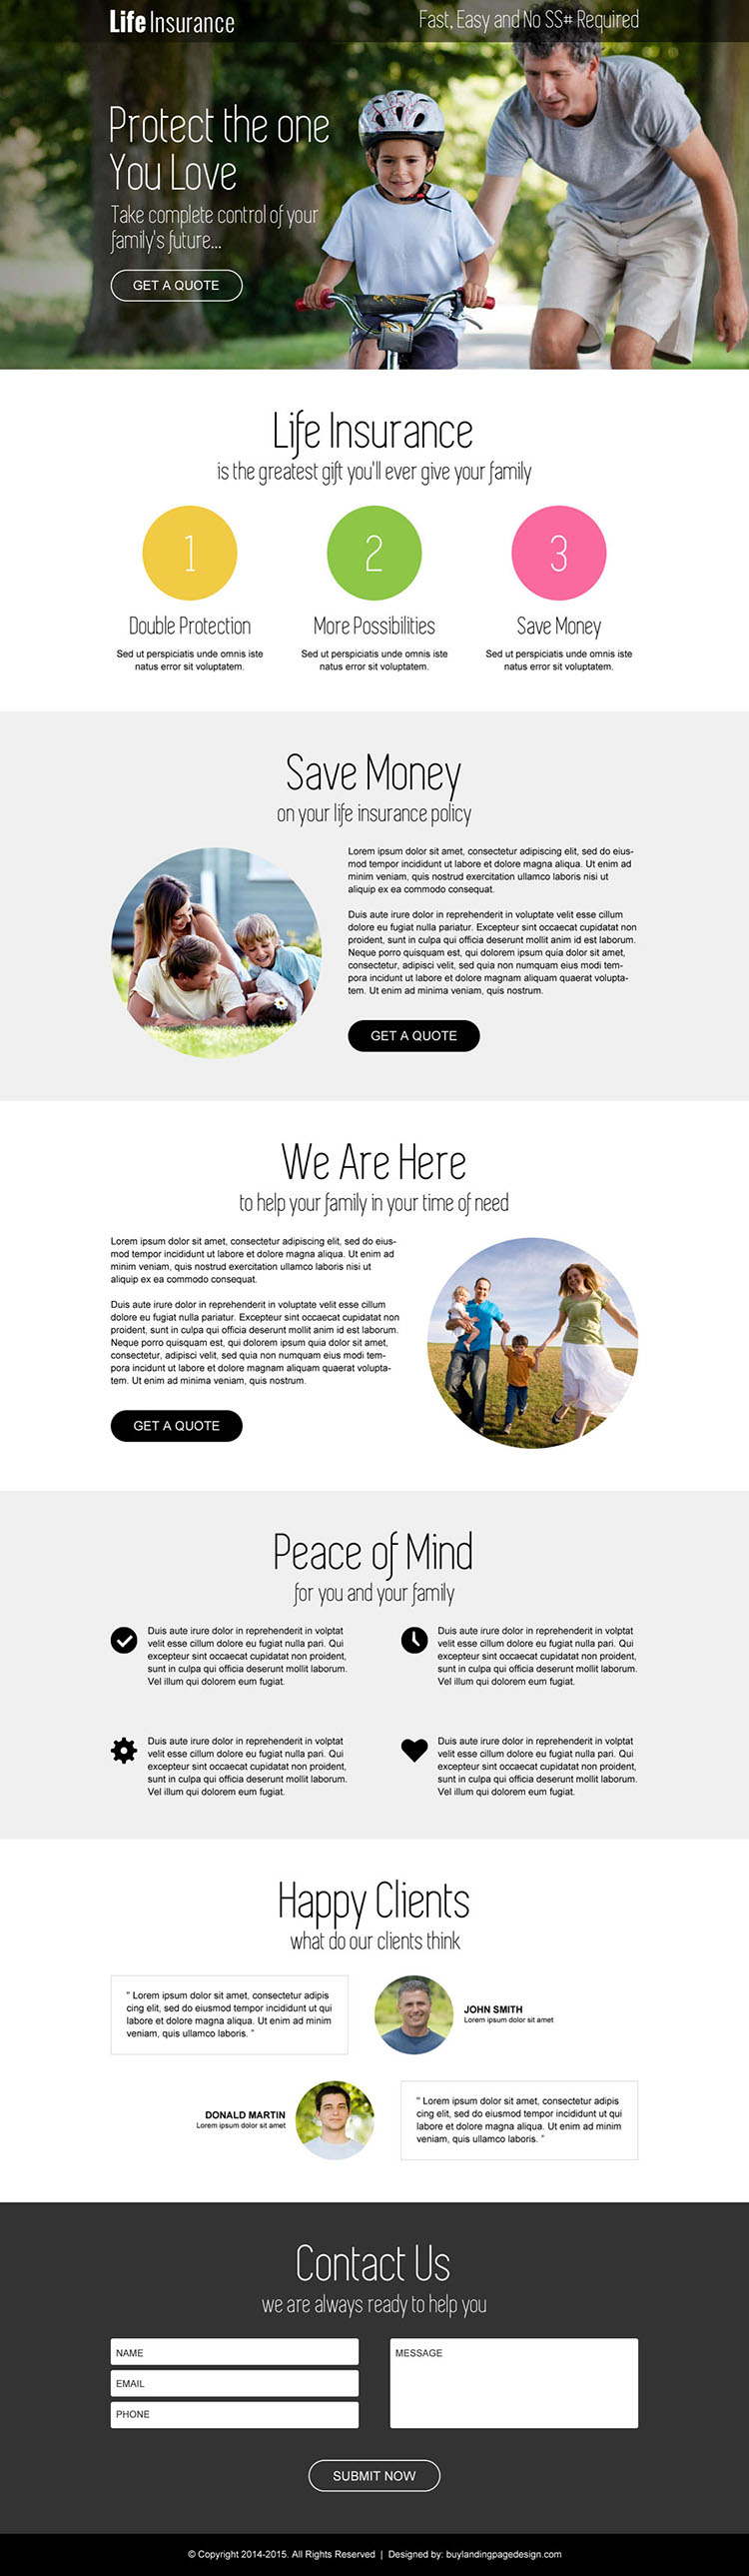 responsive life insurance free quote lead capturing landing page